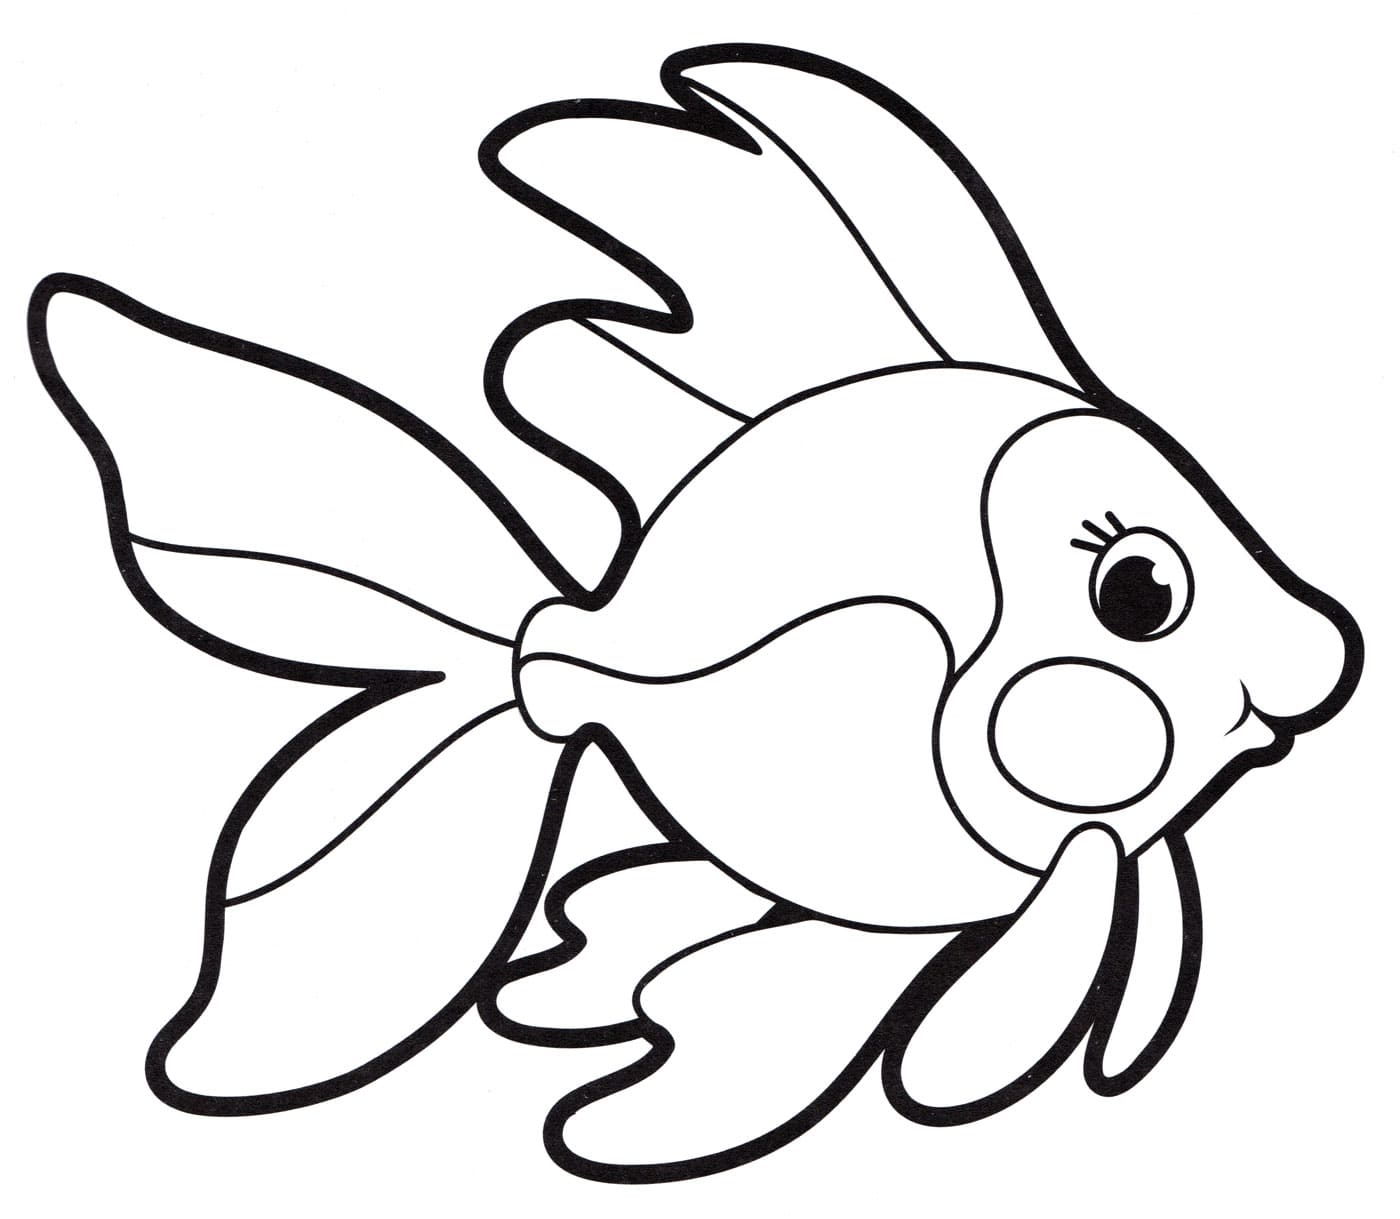 Fish coloring pages pictures free printable